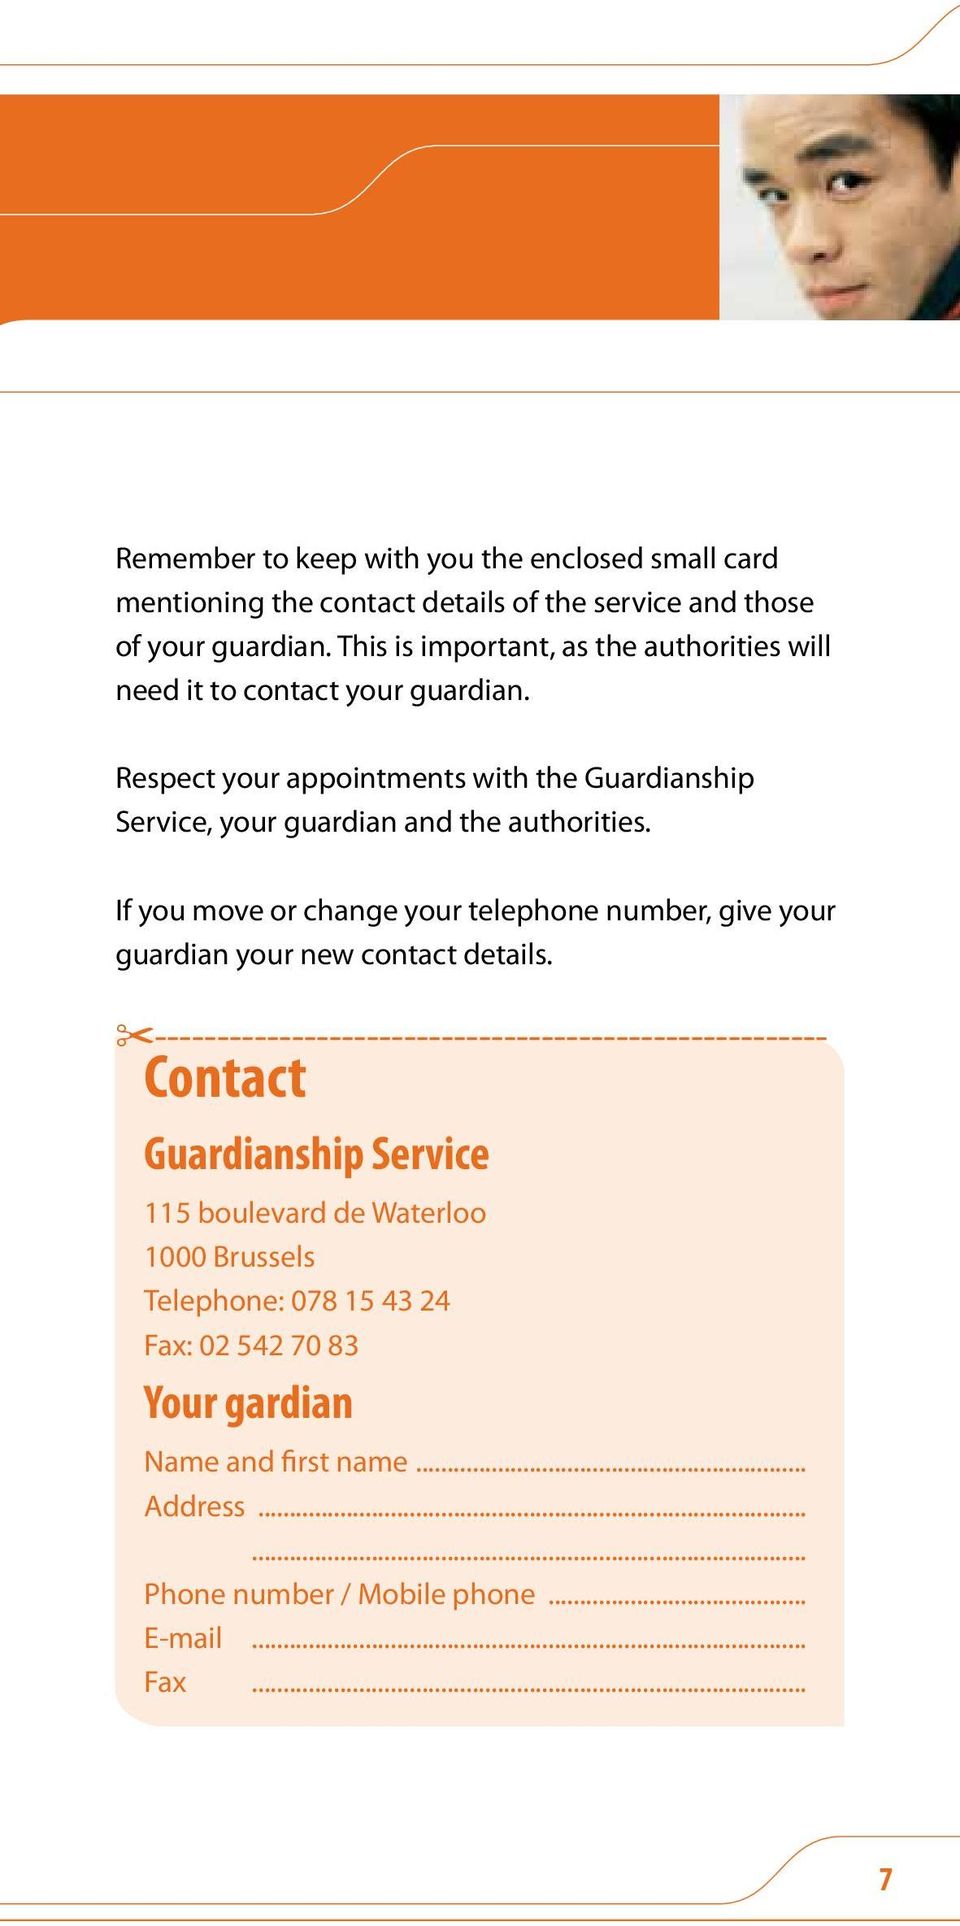 Respect your appointments with the Guardianship Service, your guardian and the authorities.